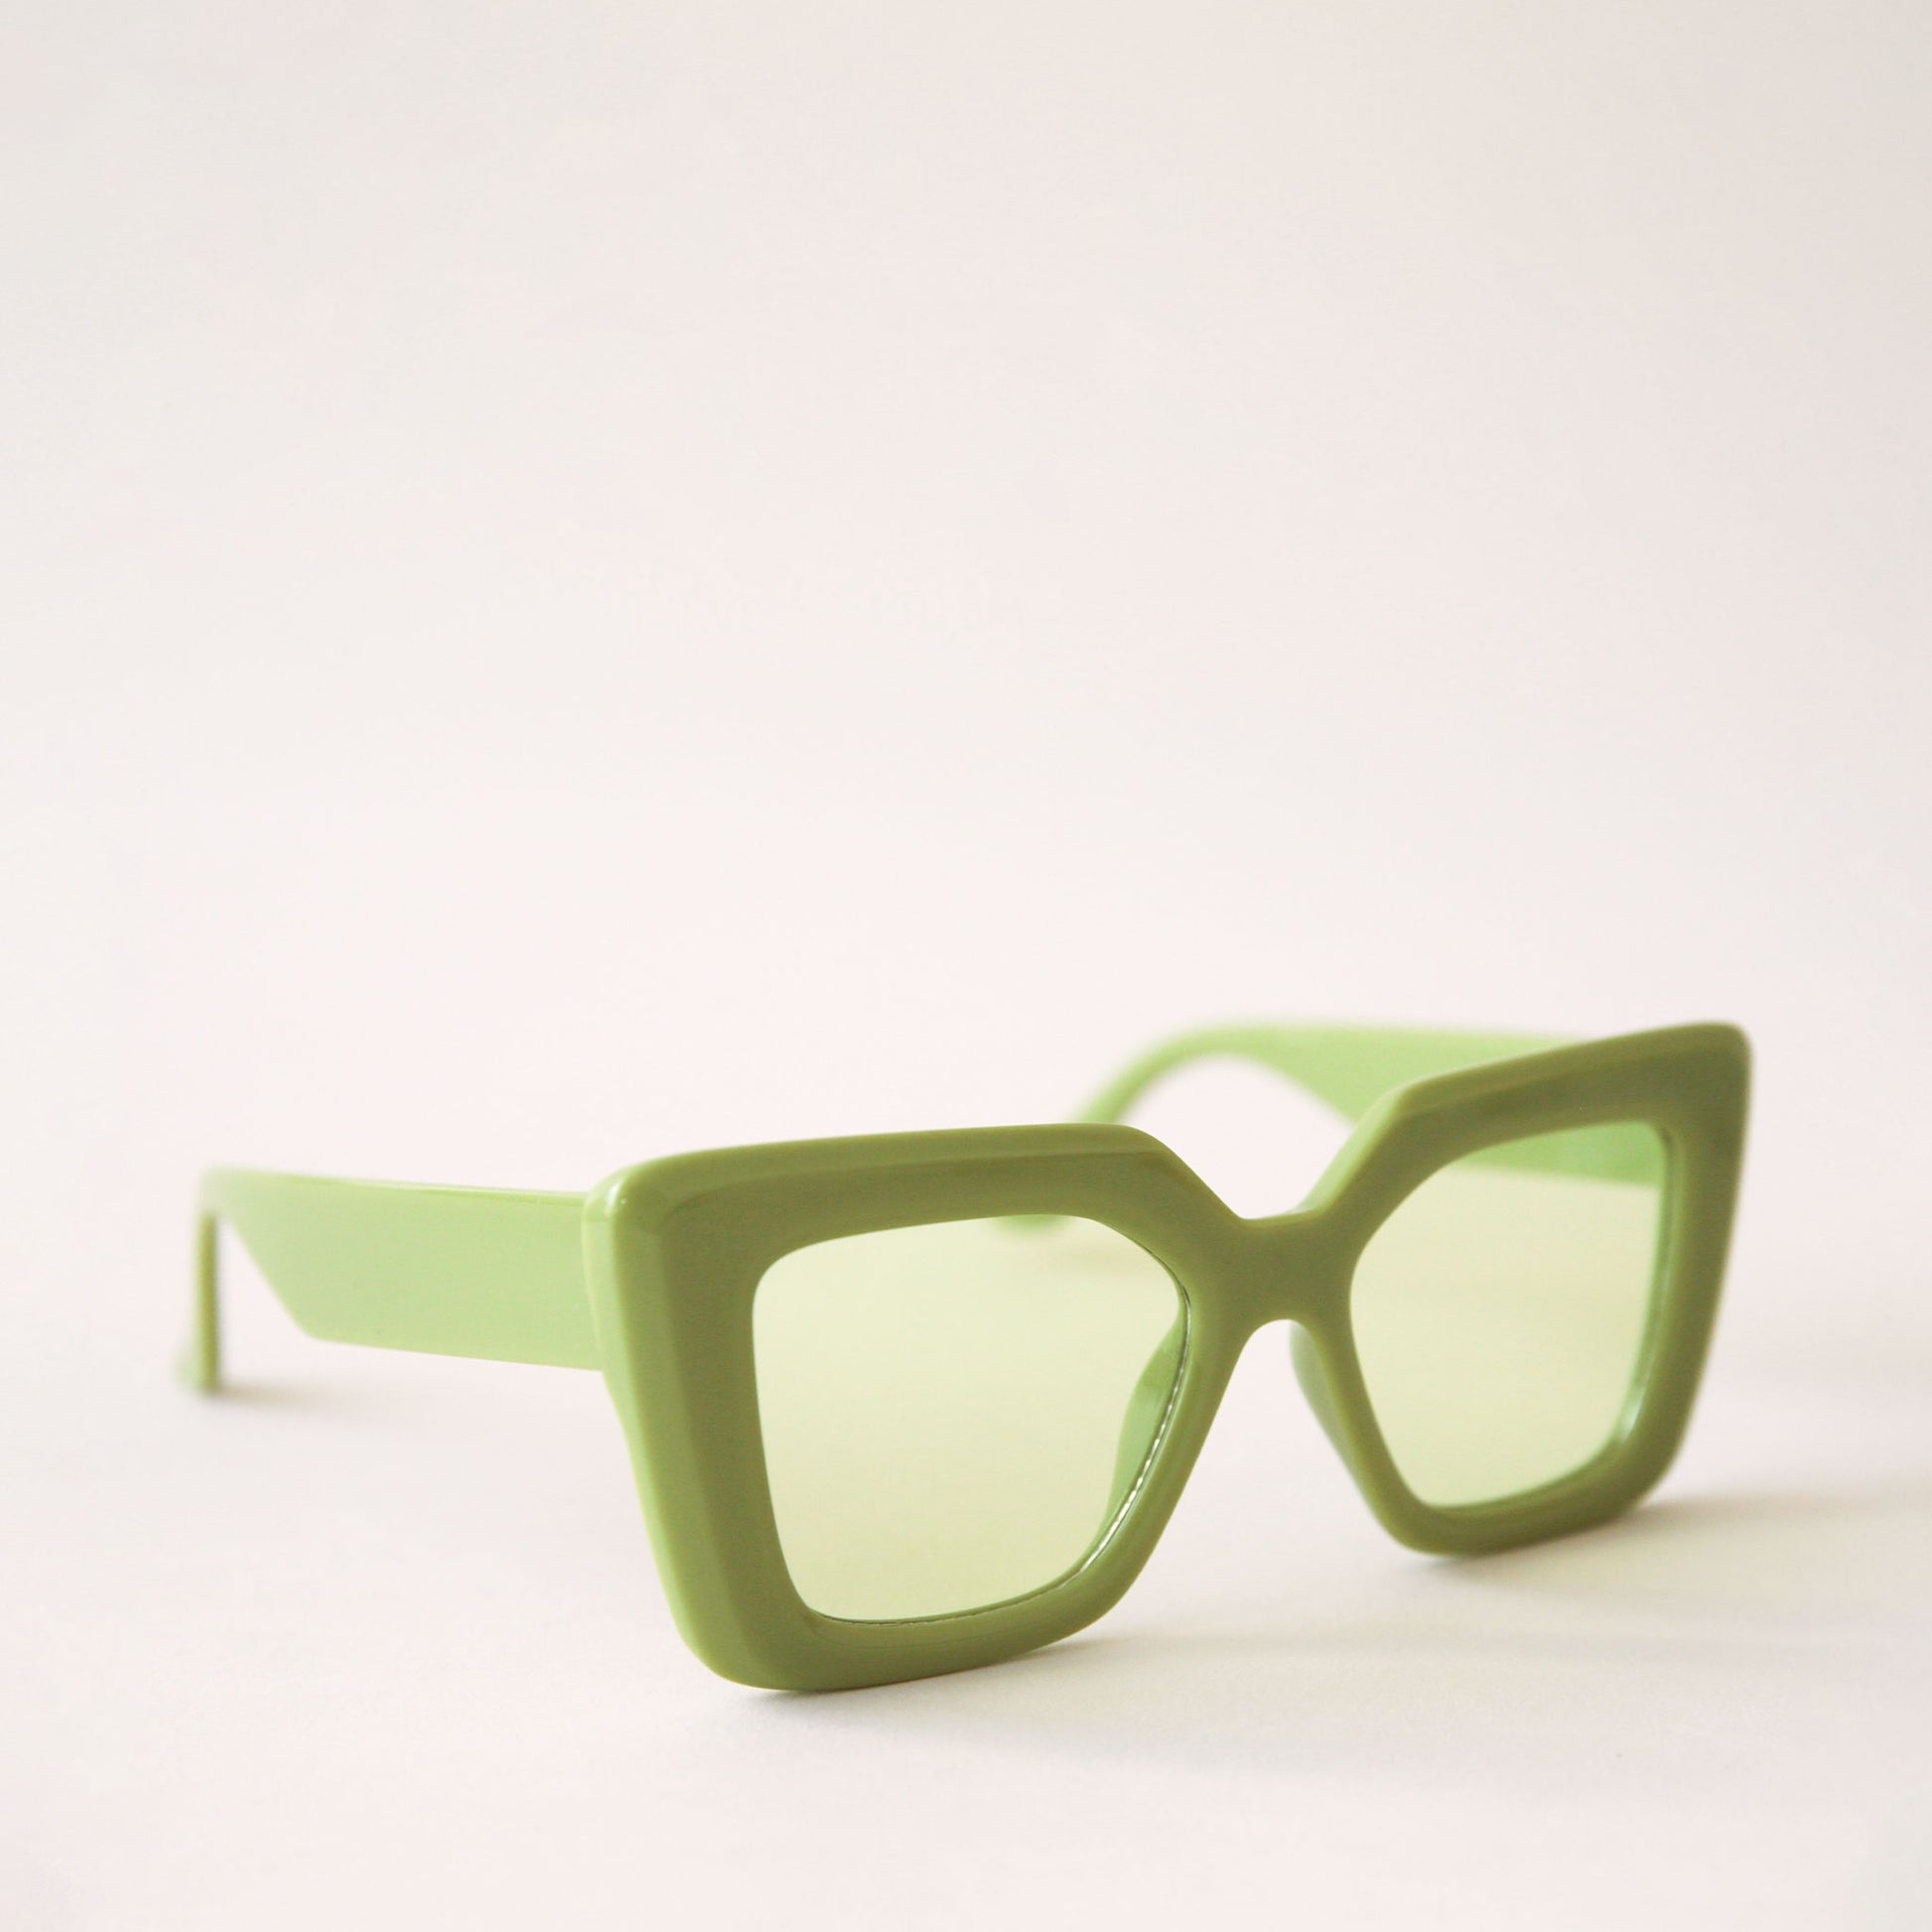 70's inspired sunglasses with a lime green, rectangle frame that has a slight cat eye point at the tops along with light green lenses.